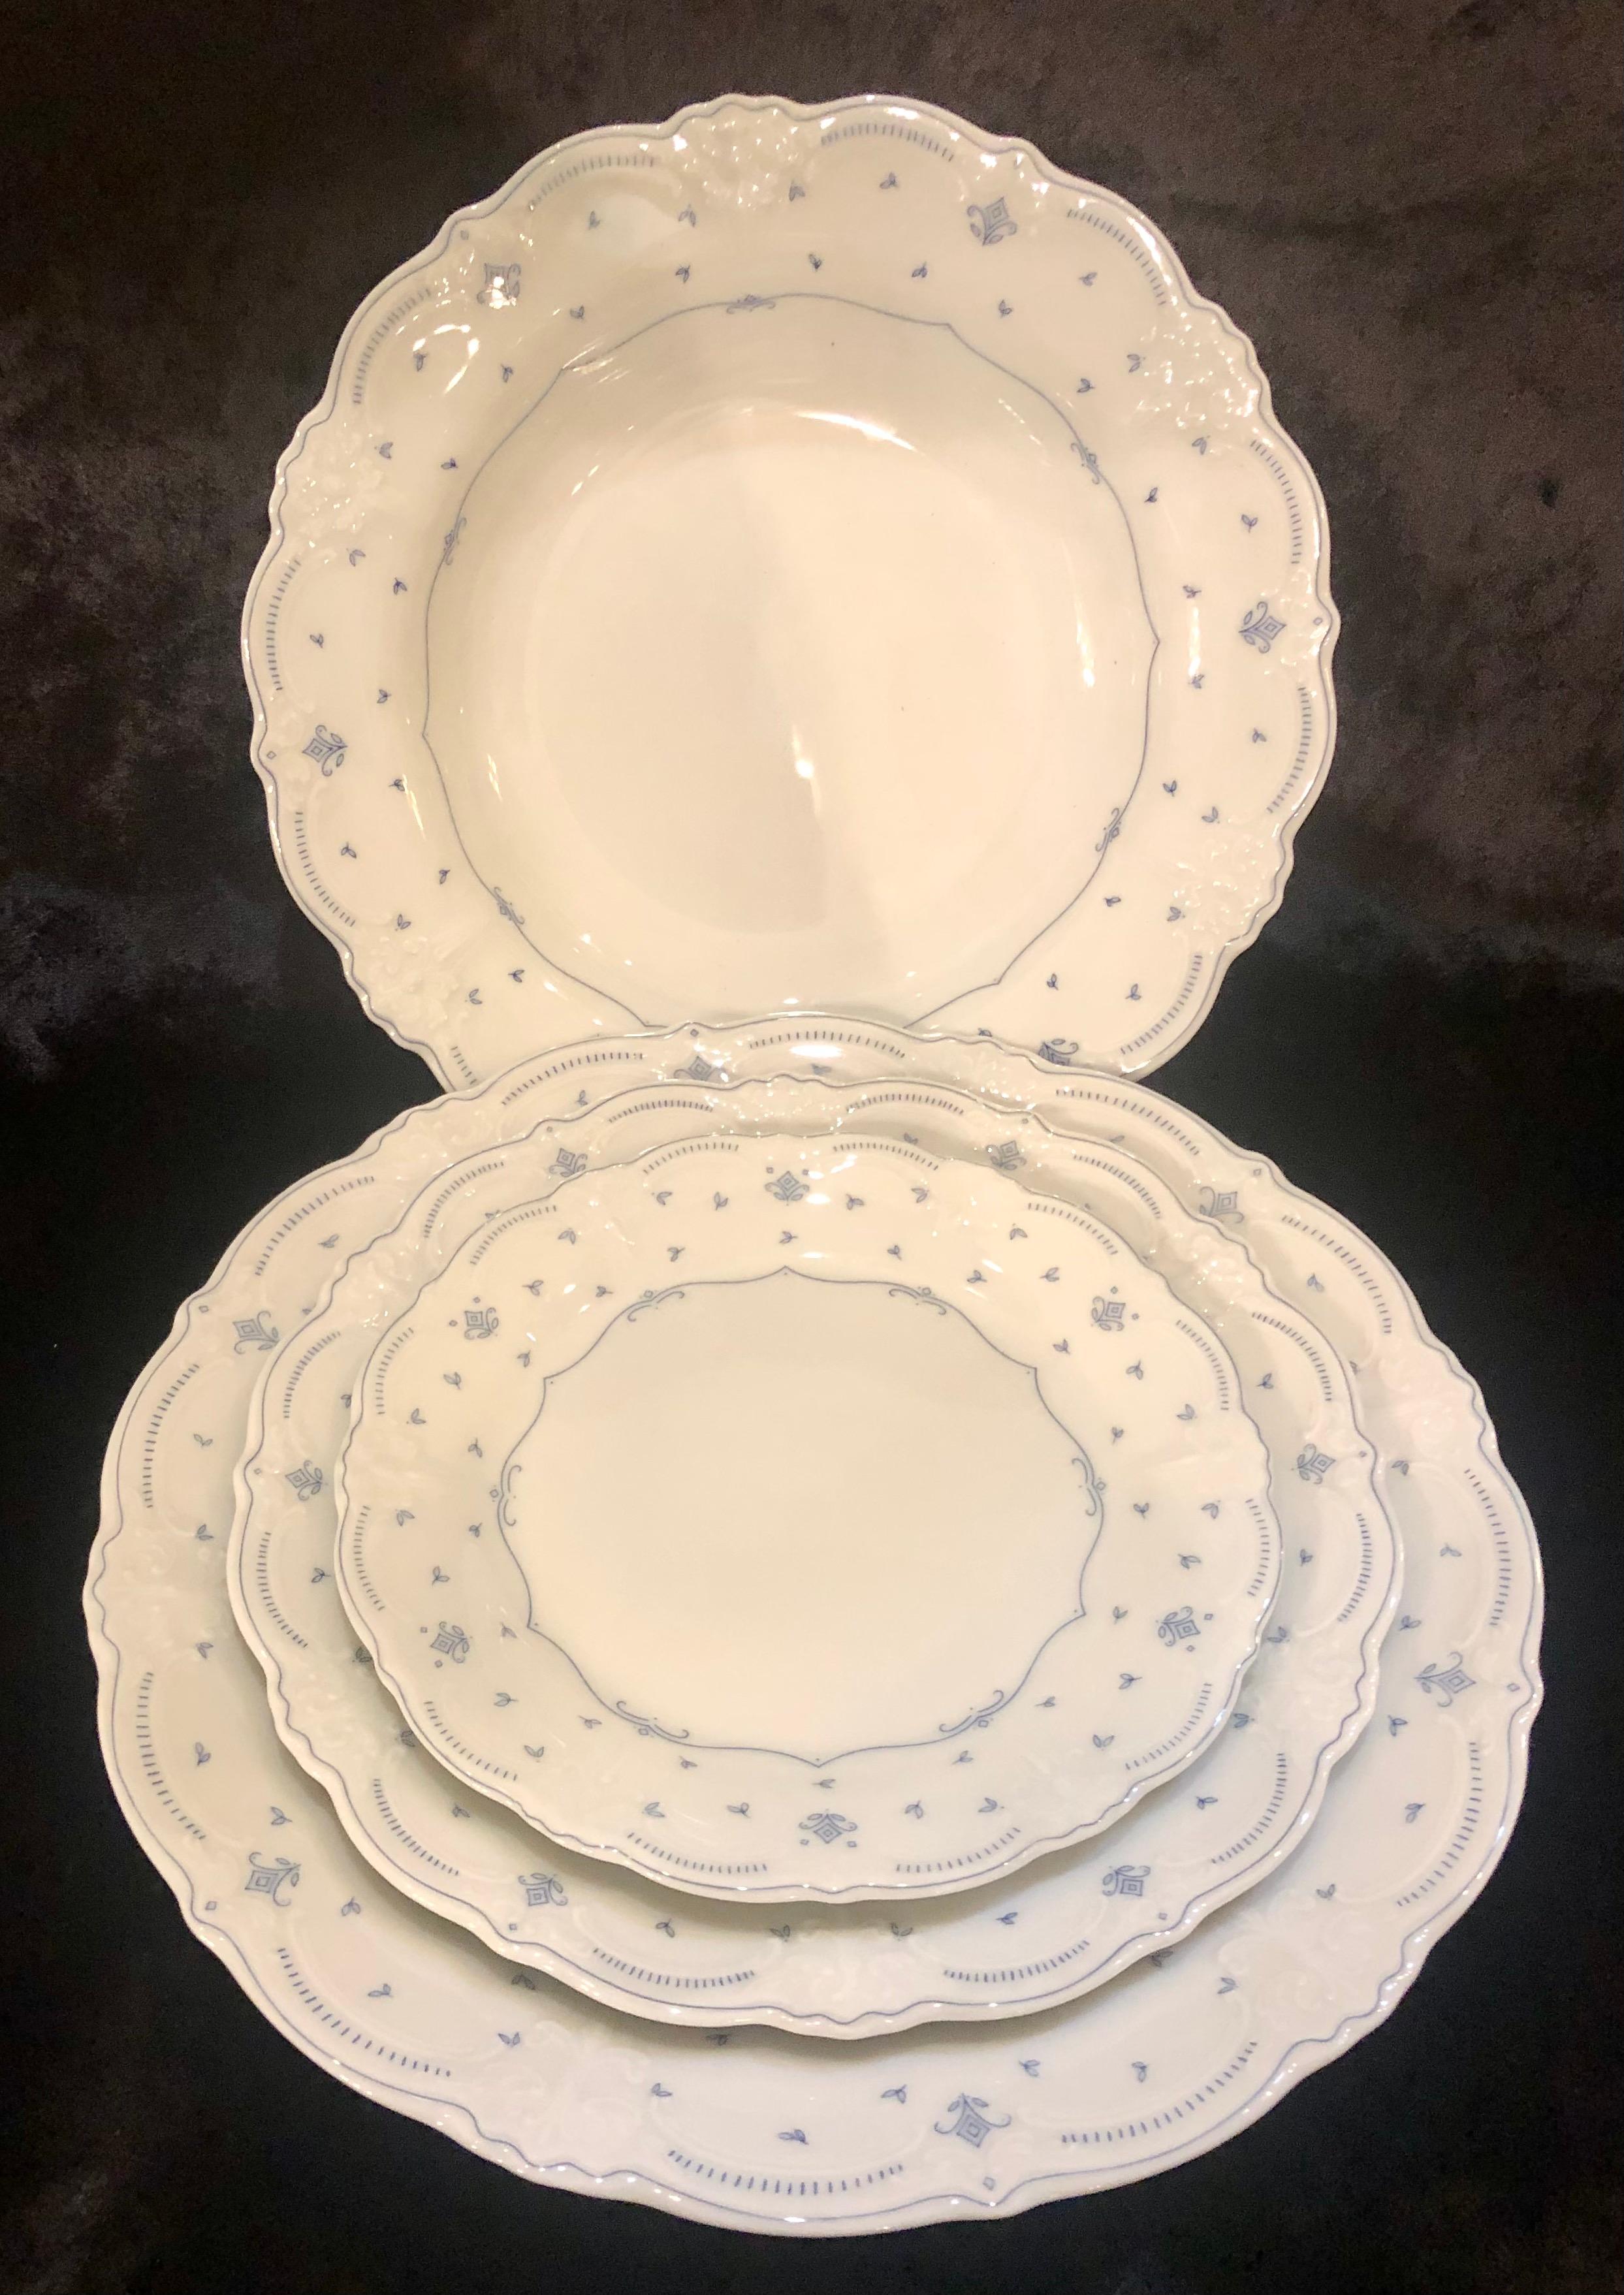 61 pieces Hutschenreuther Porcelain dinner set, Germany, 1814. Fleur De Lis Blue by Tirschenreuth in a bone white and celeste blue finish. This impossible to find dinner set is in lovely condition and ready to impress in any setting. Complete